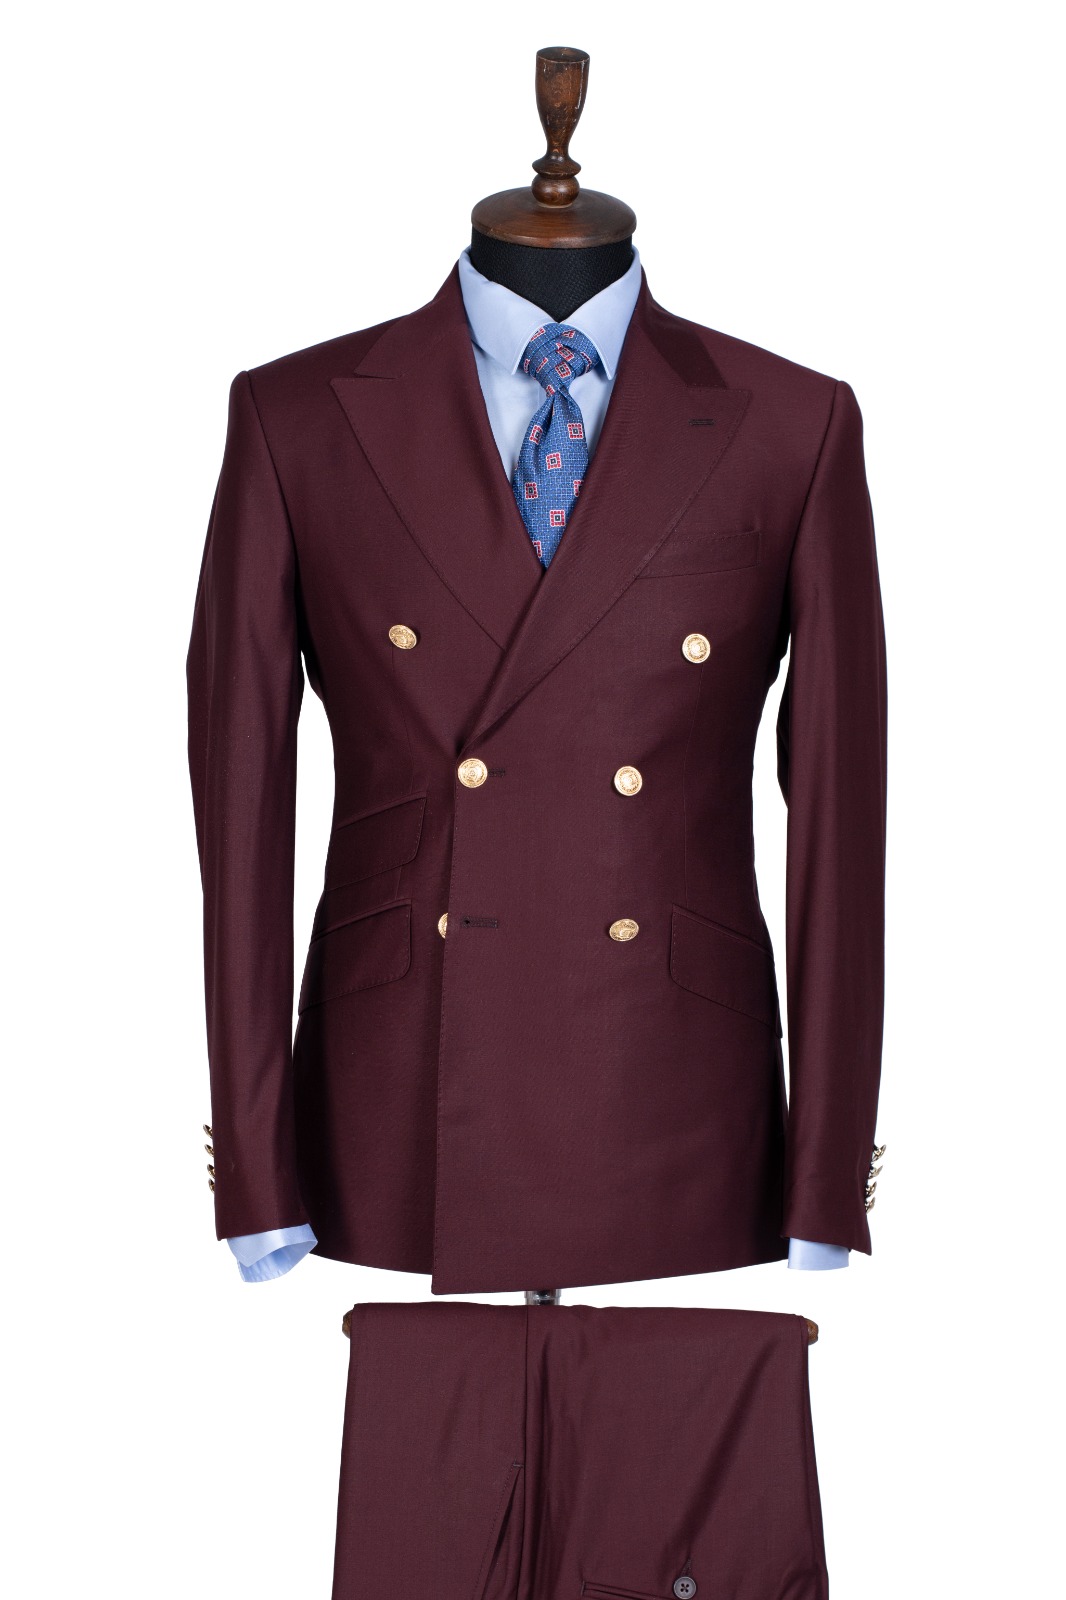 BURGUNDY DOUBLE BREASTED SUIT